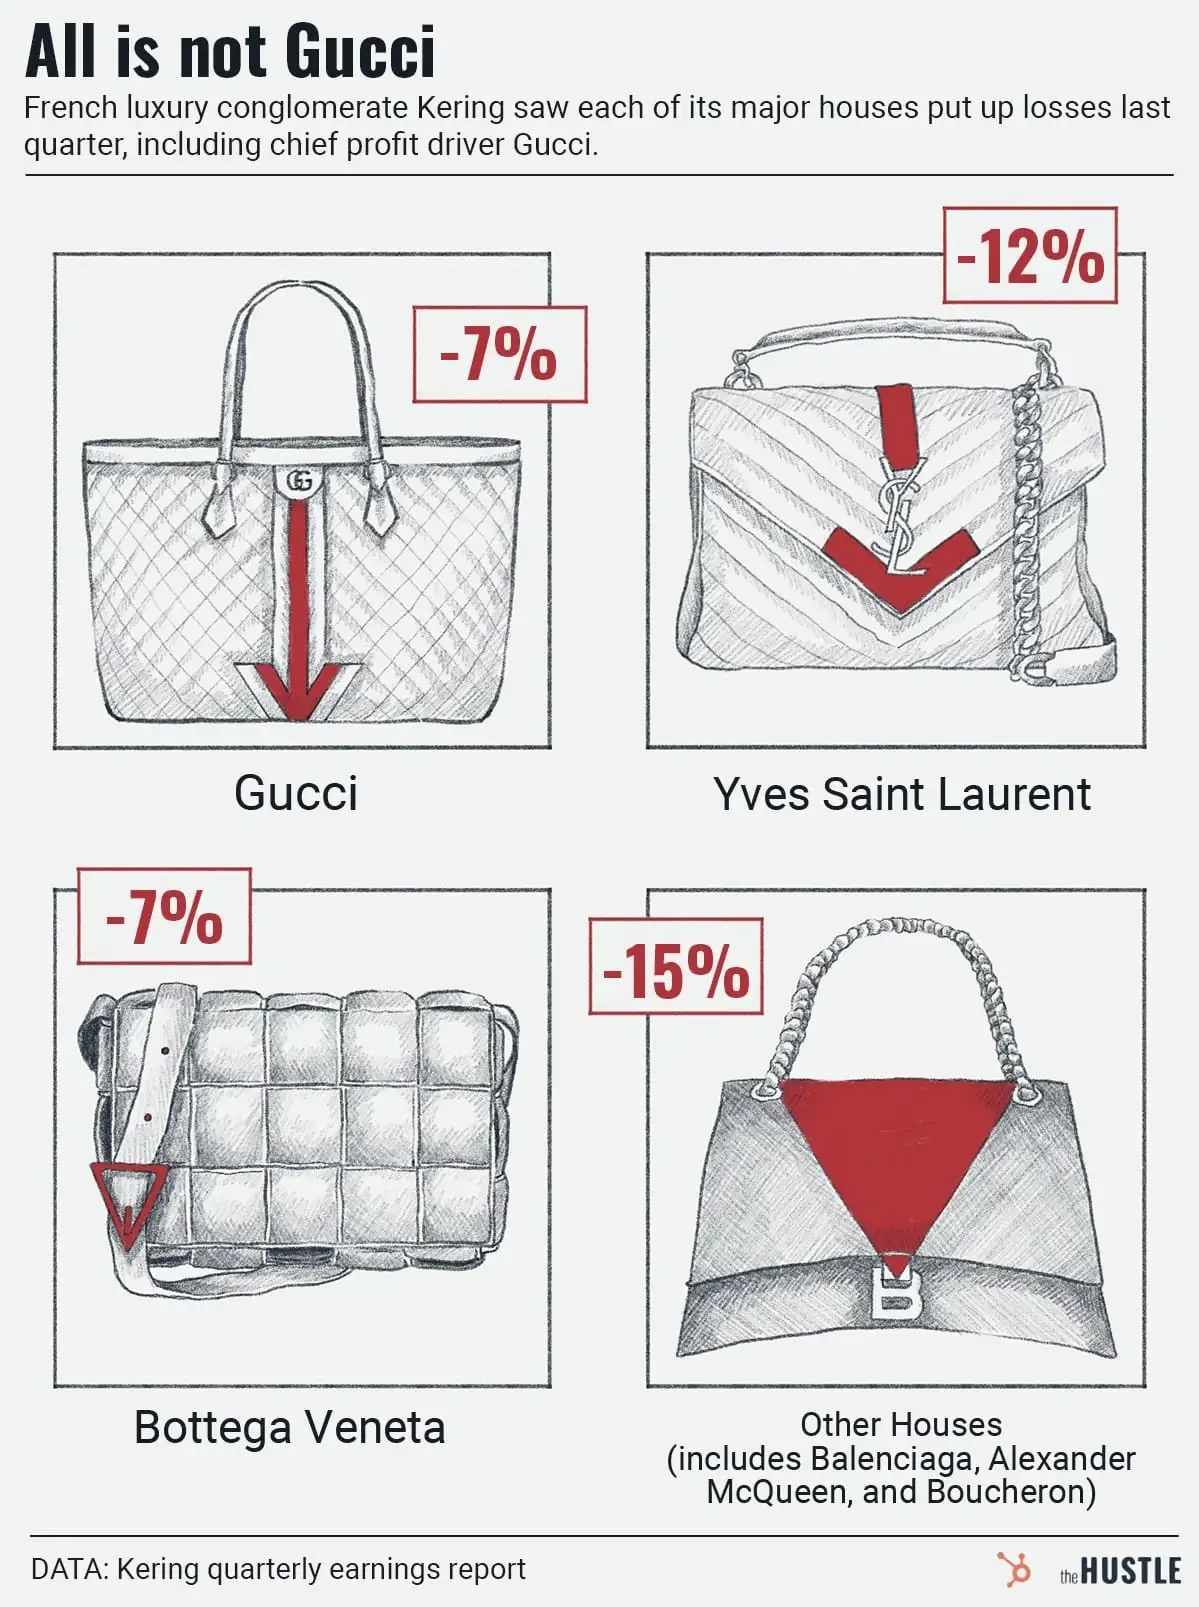 Luxury brands seek a miracle inside their (ostentatious, overpriced) bag of  tricks - The Hustle